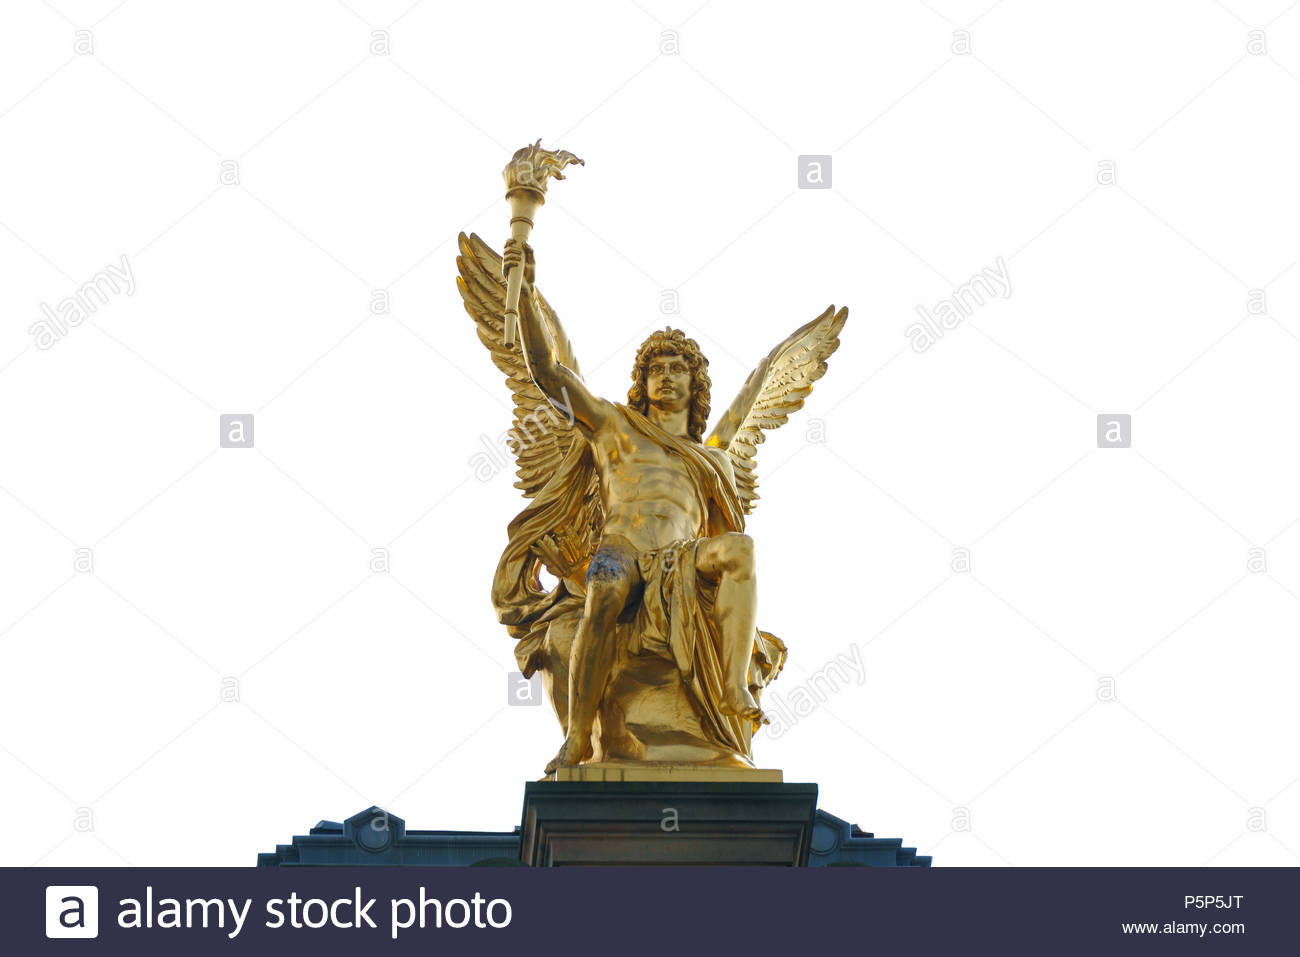 Golden Statue Of Eros Dresden Saxony Germany Isolated On White